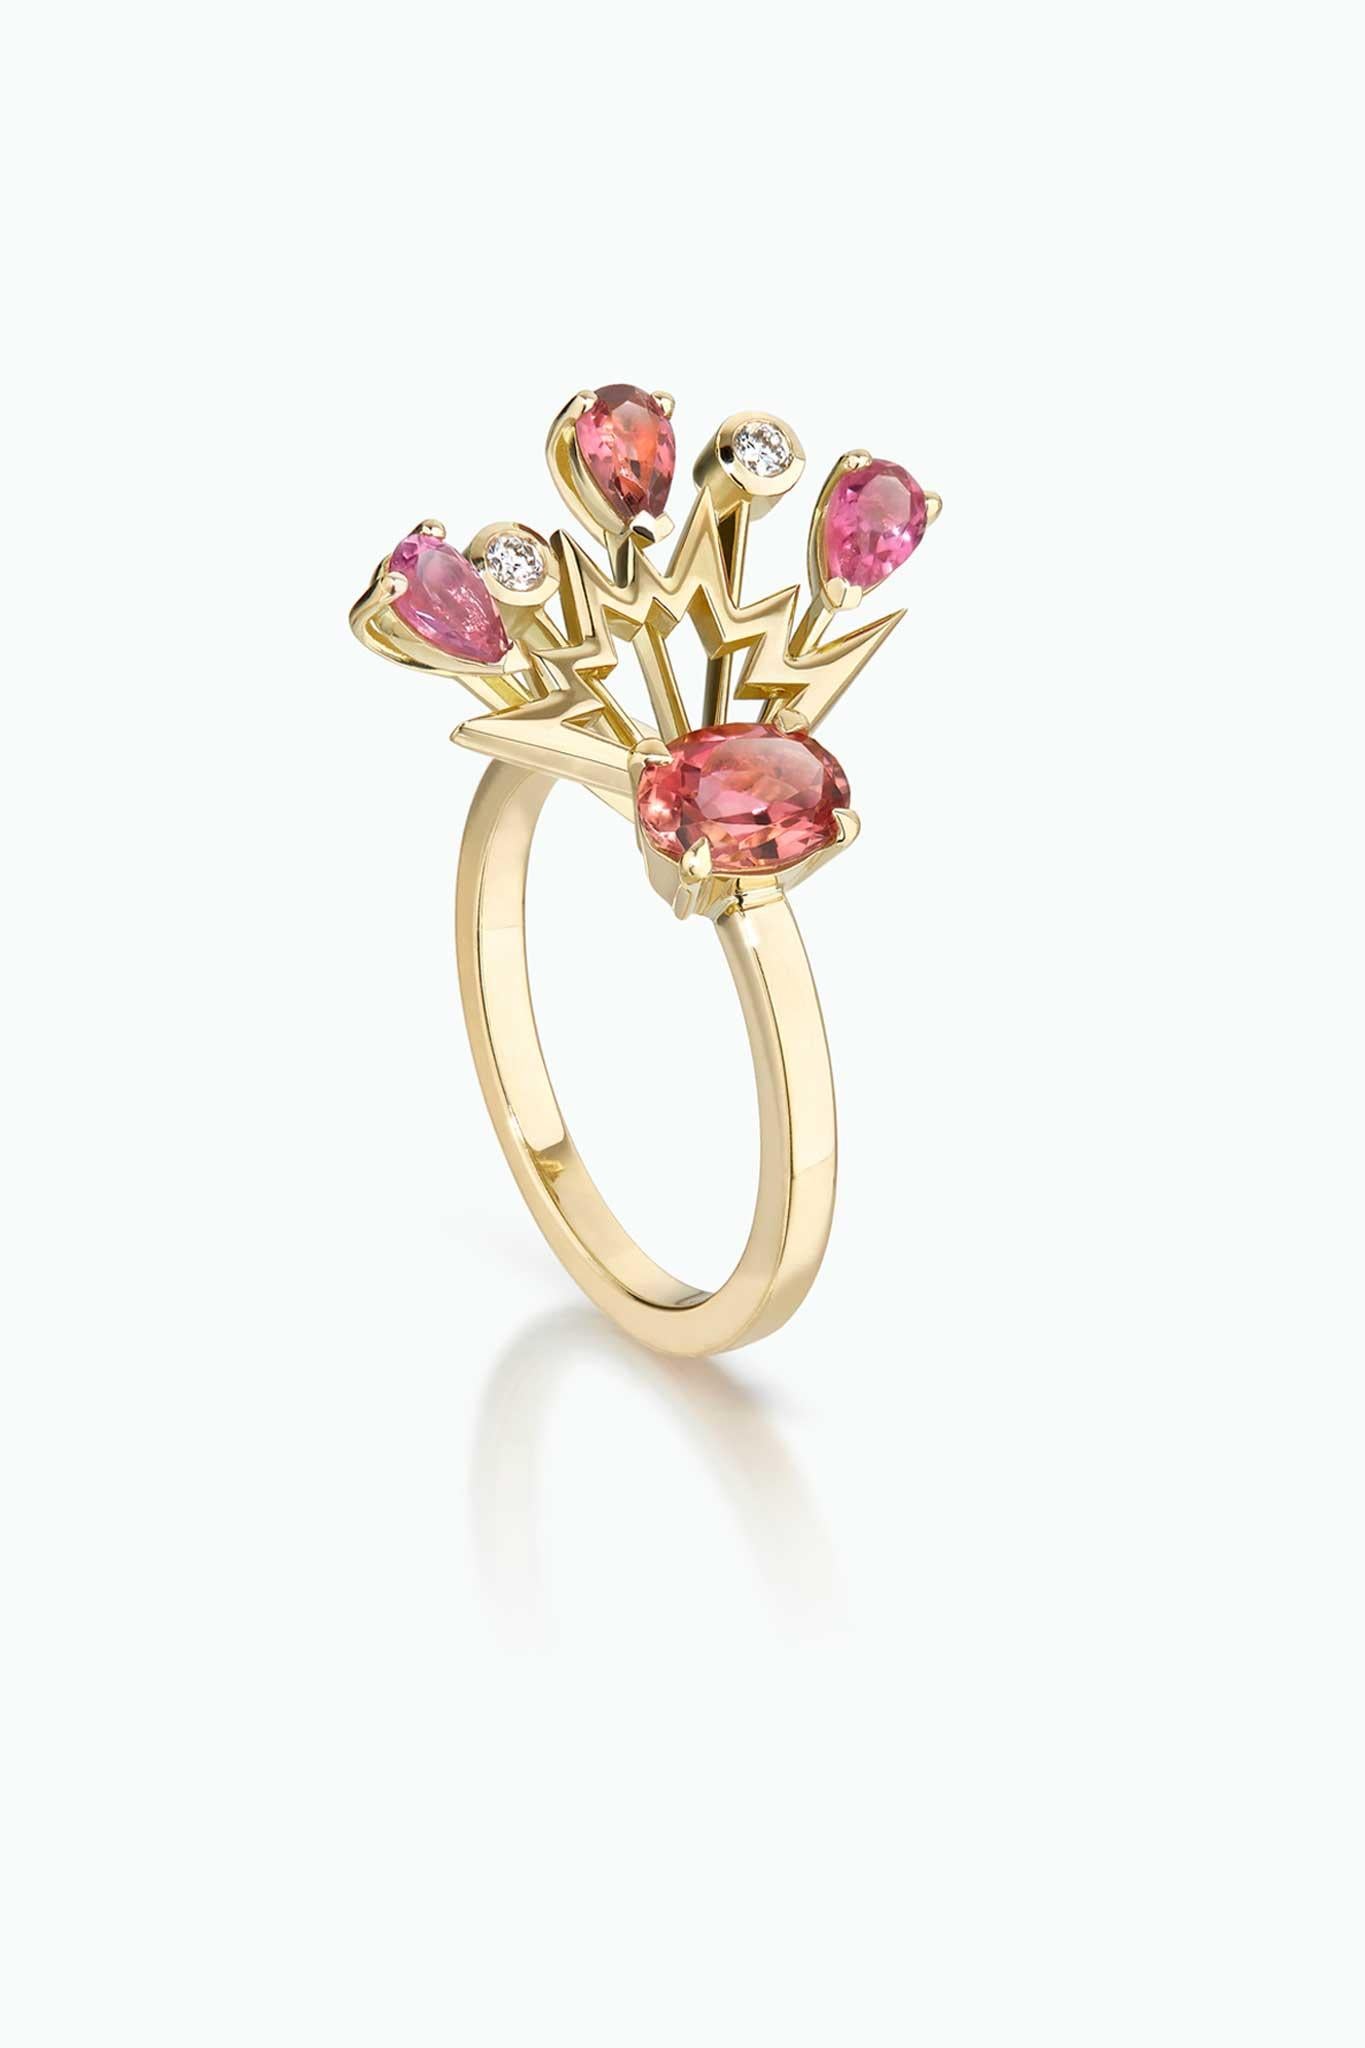 Handcrafted  in London in 18 Carat Yellow Gold with a Central Oval Cherry Coloured Tourmaline, surrounded by Brilliant Cut Diamonds, and Pear Shaped Pink Sapphires and Tourmaline.

Cherry Bomb Ring is a unique, modern and layered design, that